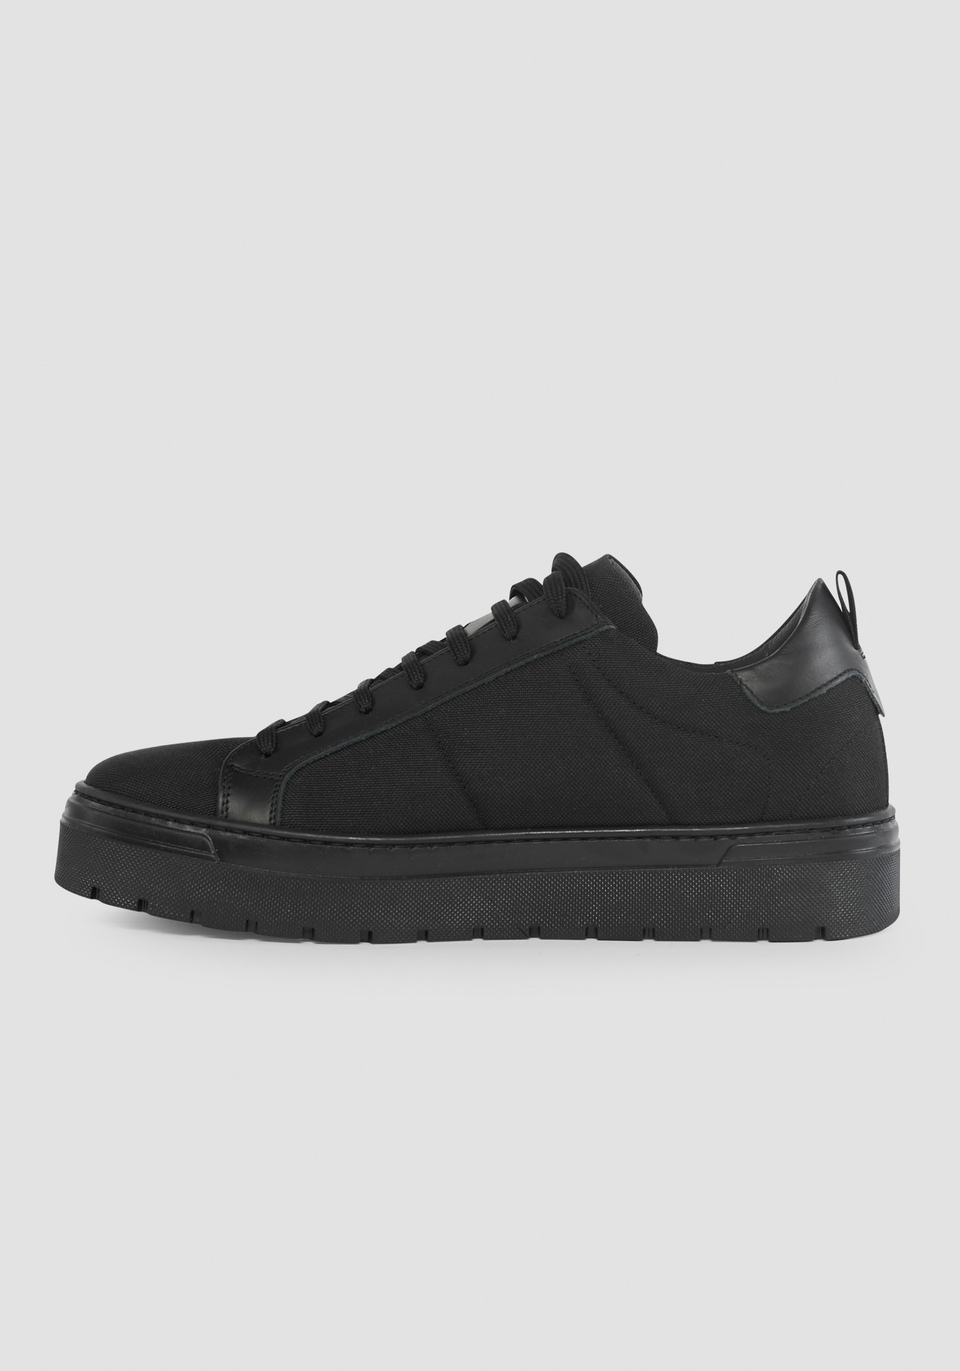 "METAL BOLD" LOW-TOP SNEAKERS WITH LEATHER DETAILS - Antony Morato Online Shop